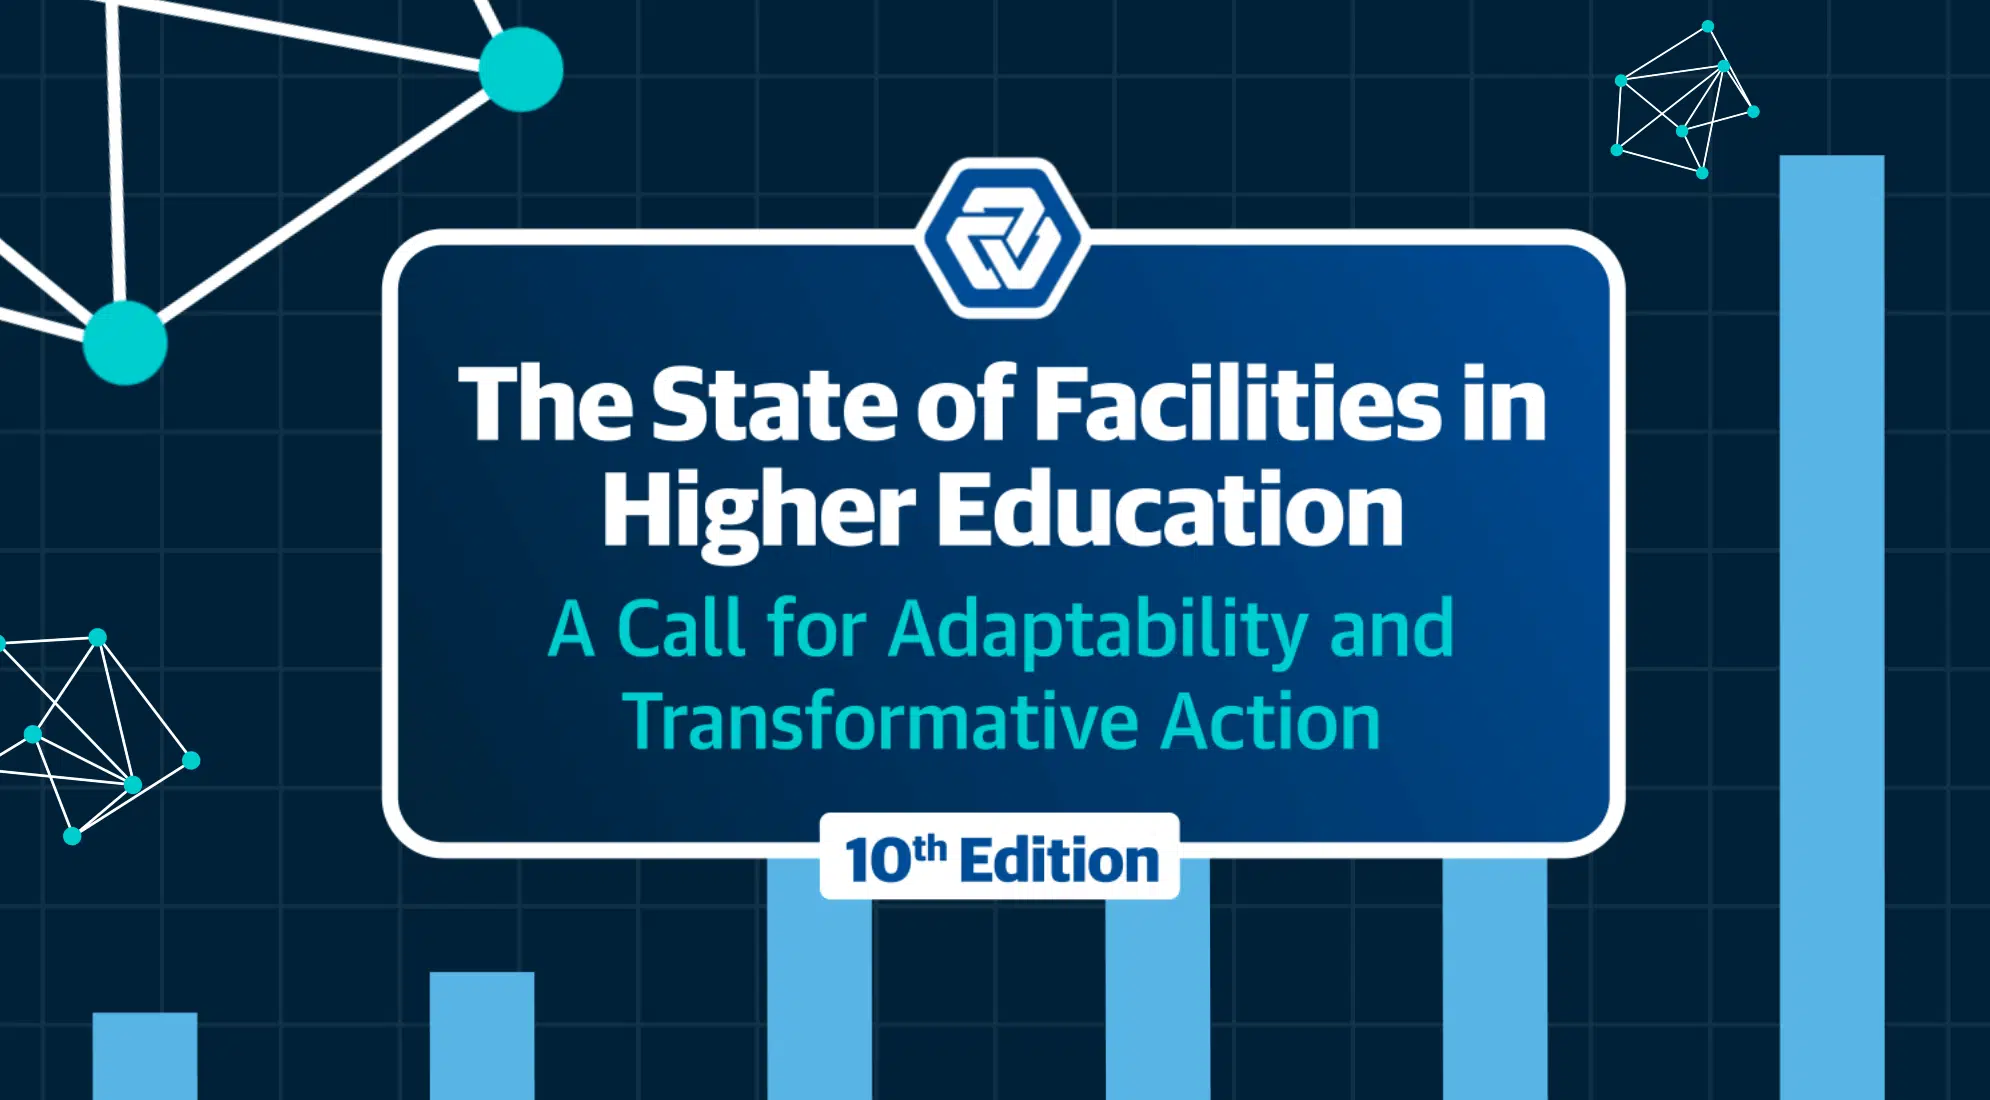 SPECIAL PREVIEW: The State of Facilities in Higher Education, 10th Edition 1